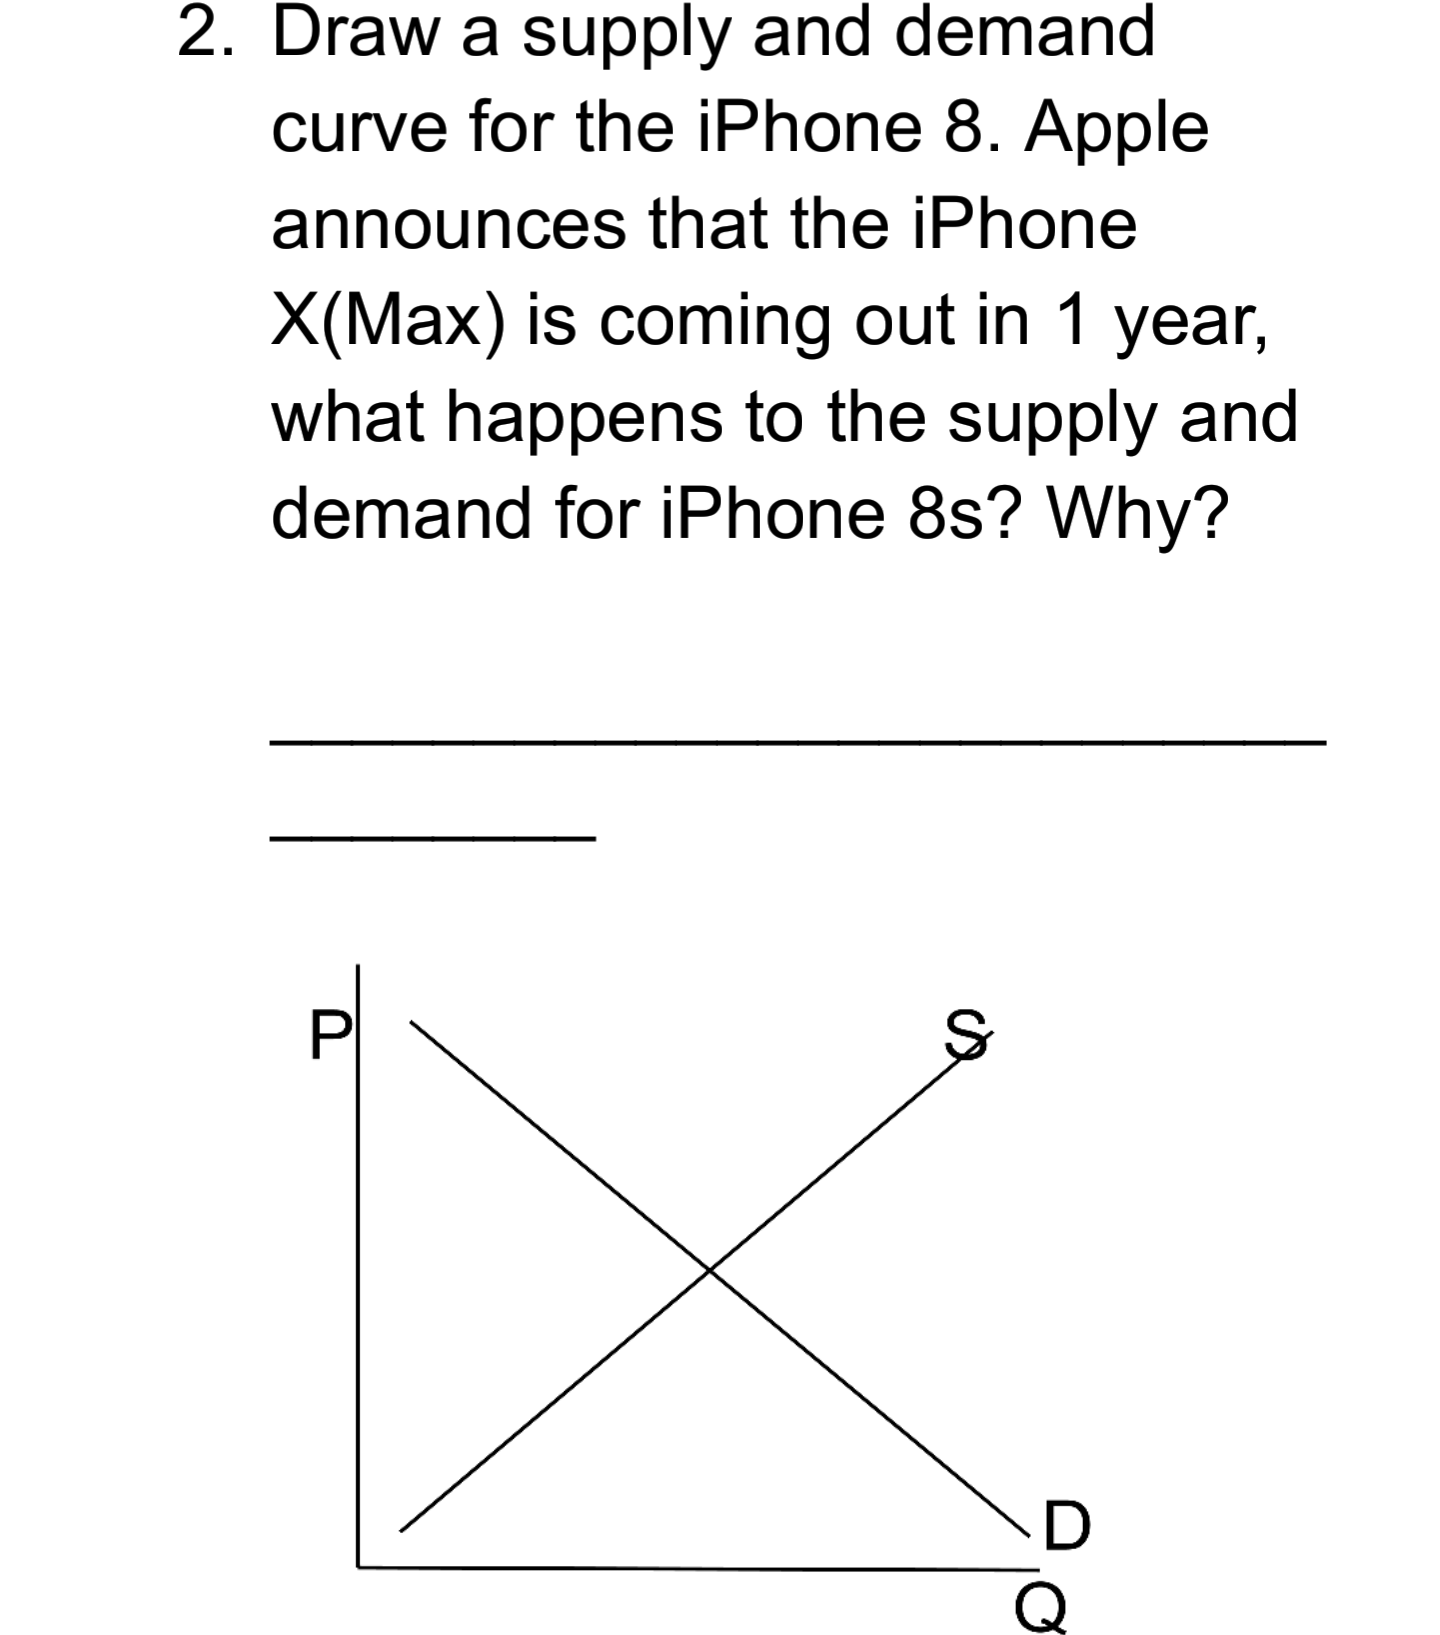 2. Draw a supply and demand
curve for the iPhone 8. Apple
announces that the iPhone
X(Max) is coming out in 1 year,
what happens to the supply and
demand for iPhone 8s? Why?
